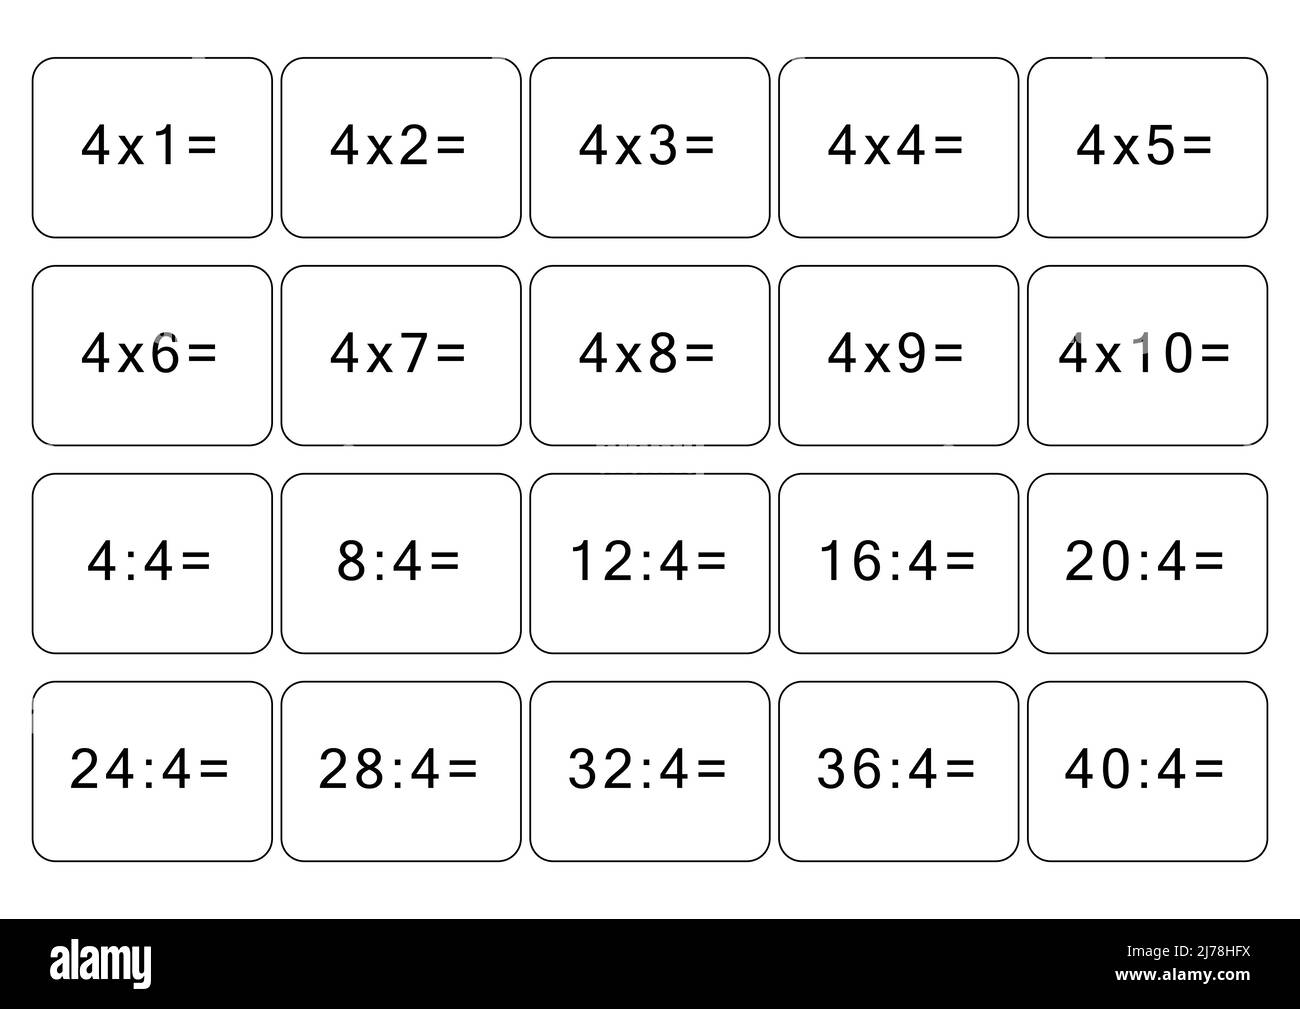 rules-of-integers-in-multiplication-multiplication-and-division-of